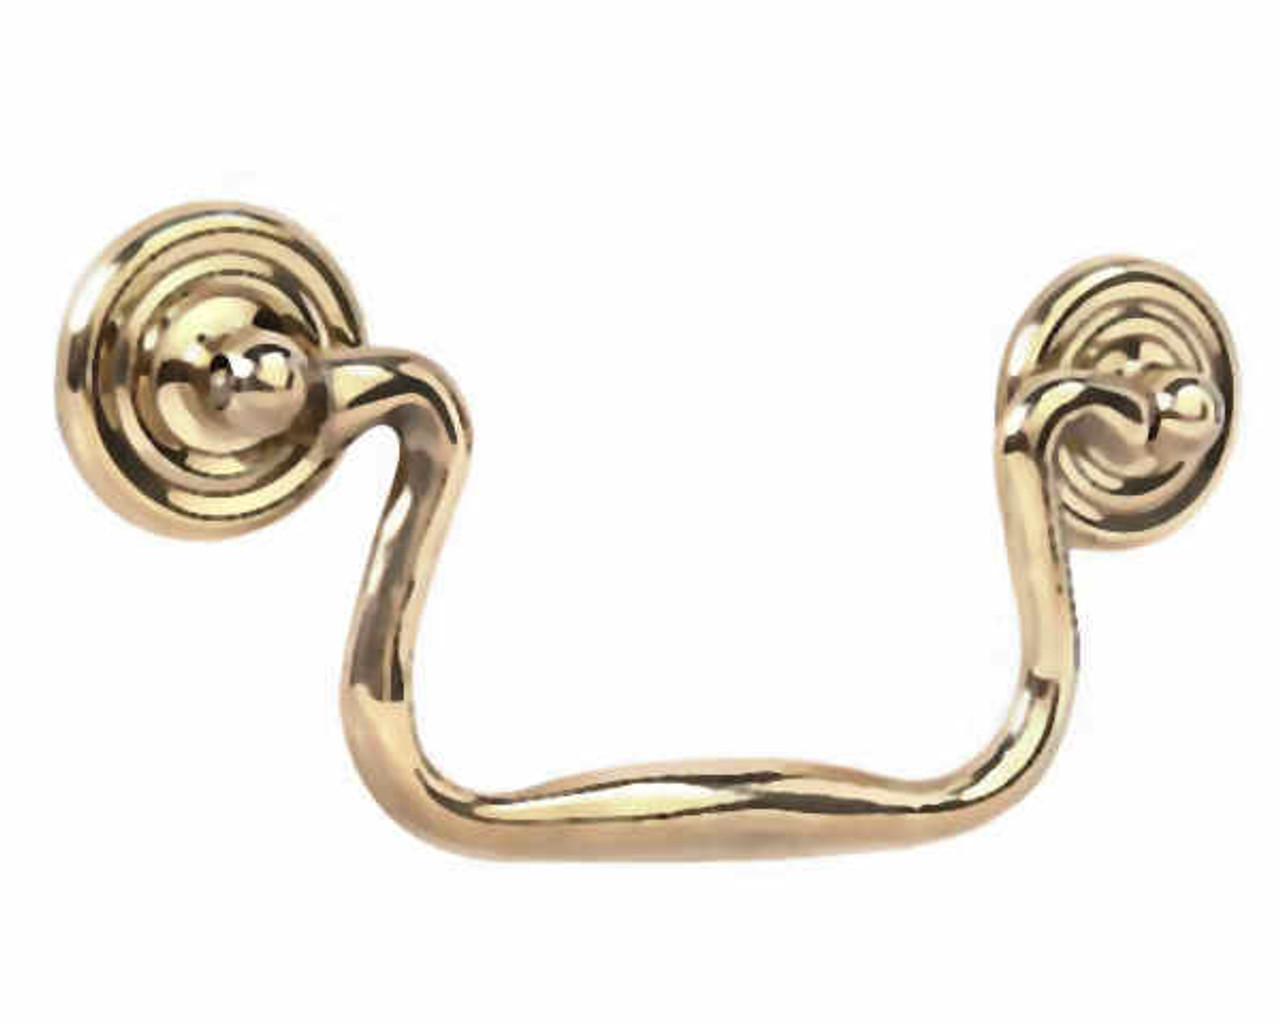 3 Swan Neck Bail Pull with Rosette - Solid Brass - D. Lawless Hardware